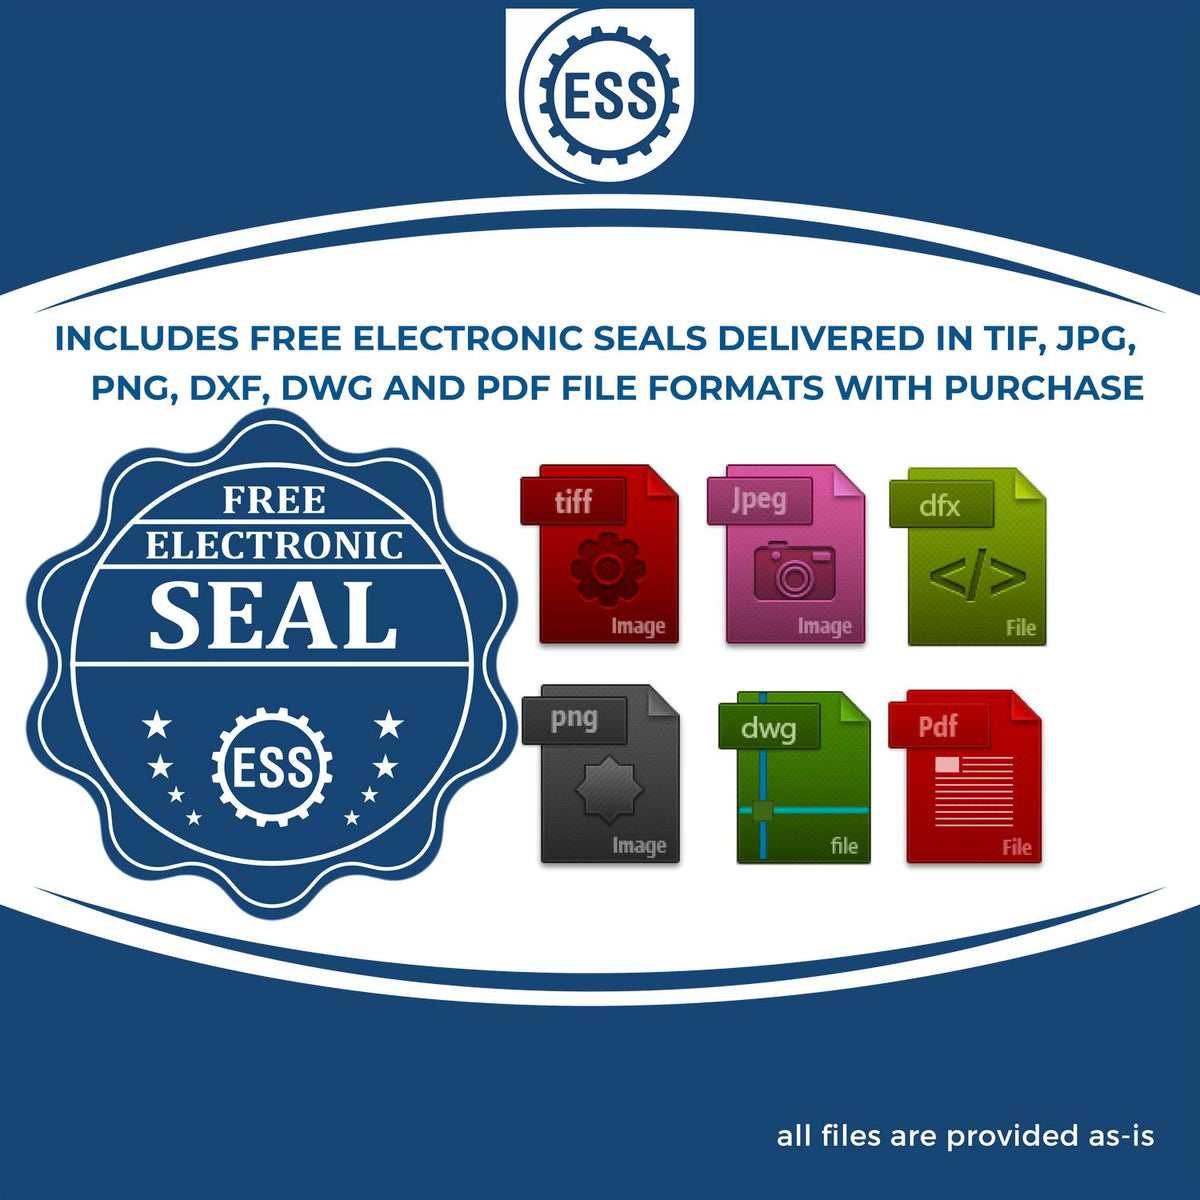 An infographic for the free electronic seal for the Gift Illinois Architect Seal illustrating the different file type icons such as DXF, DWG, TIF, JPG and PNG.